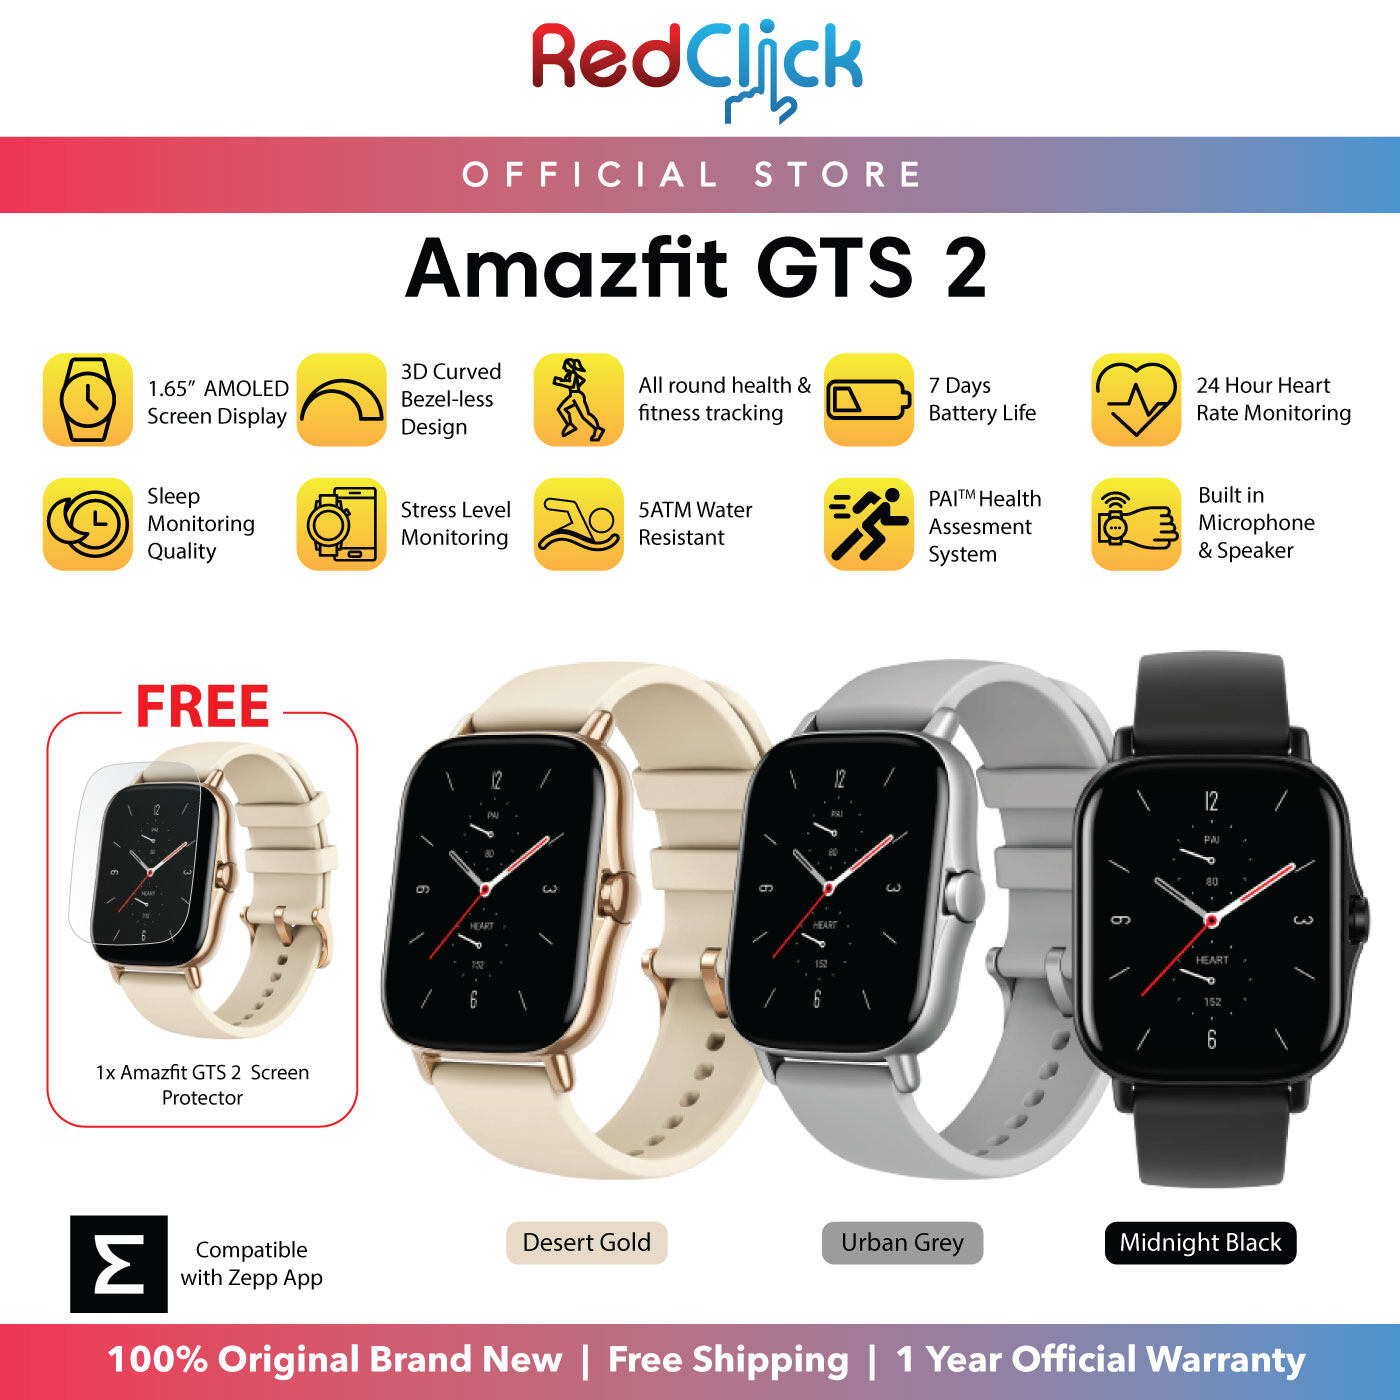 (Official Amazfit) Amazfit GTS 3 1.75" / GTS 2 1.65" AMOLED Display 3D Curved Bezel-less Design Music Storage Build-in Mic and Speaker Support Phone Call + Free Gift